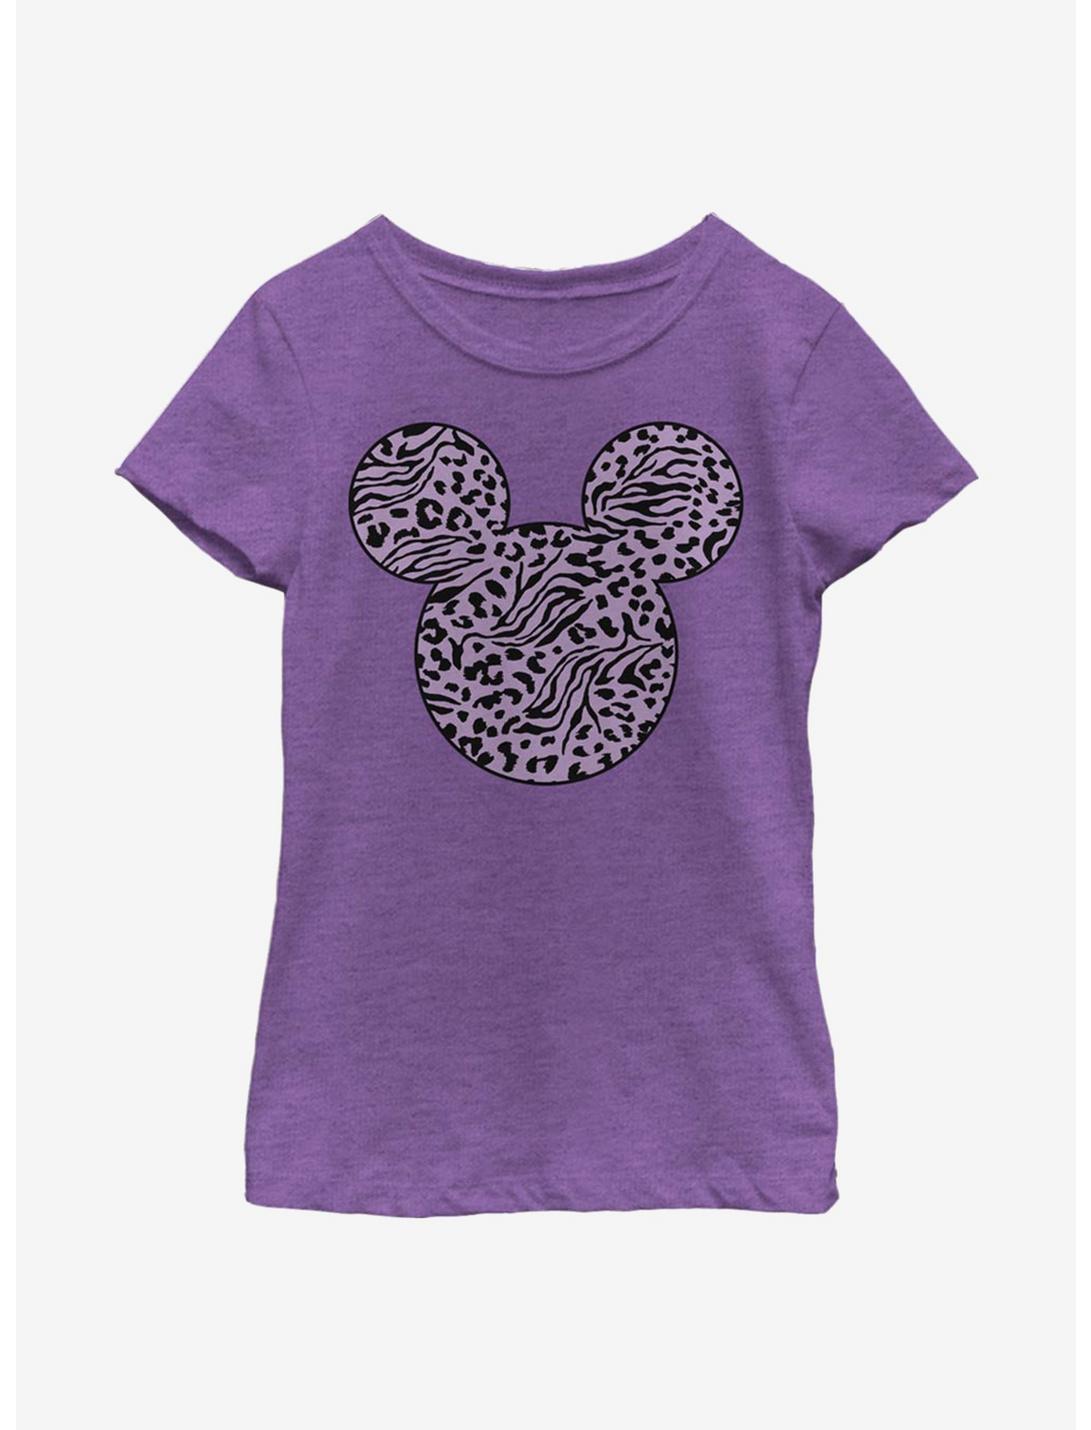 Disney Mickey Mouse Animal Print Fill Youth Girls T-Shirt, PURPLE BERRY, hi-res